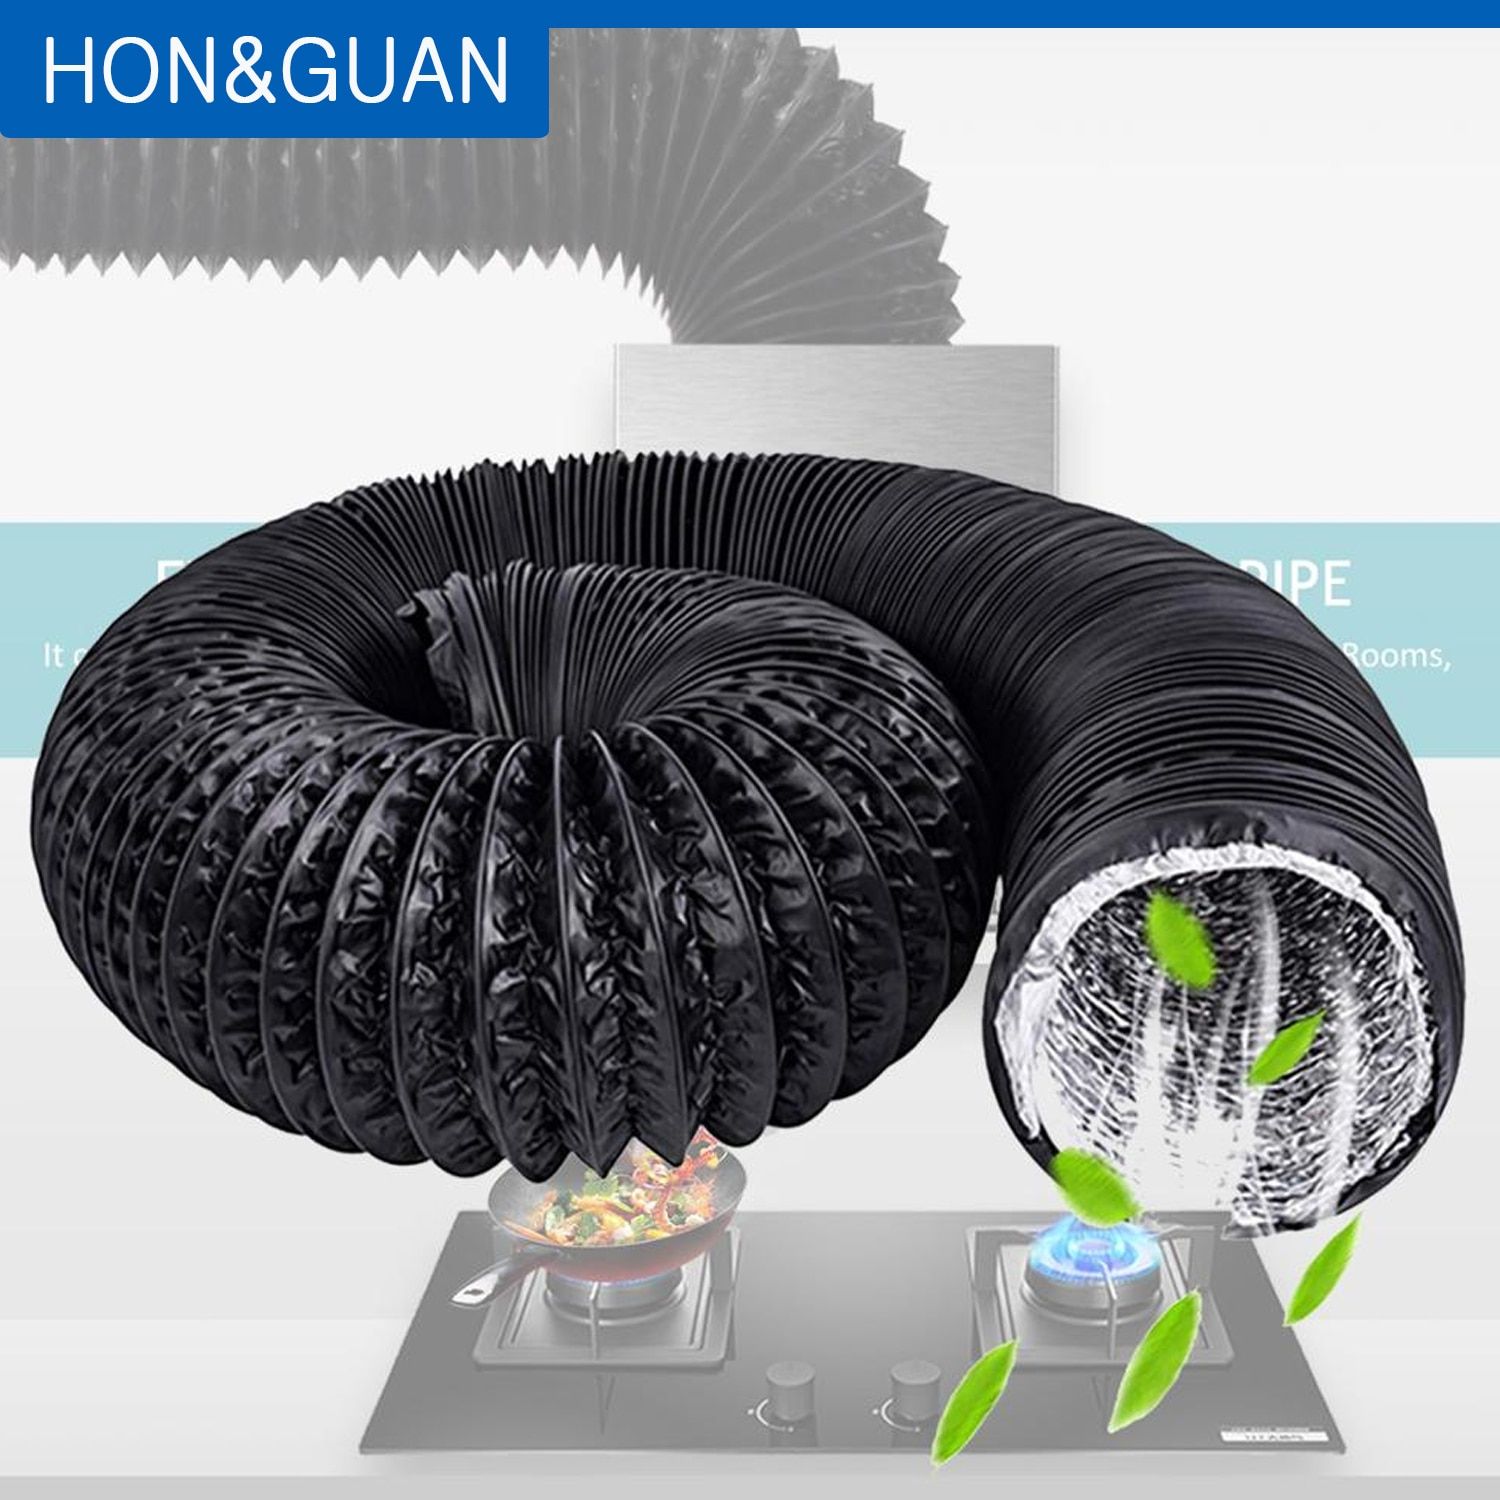 Us 1869 14 Offfan Ducting 5m 10m Aluminium Flexible Ventilation Ducting Pvc Air Ducting For Kitchen Toilet Hydroponics Extractor Fan Ductair in proportions 1500 X 1500